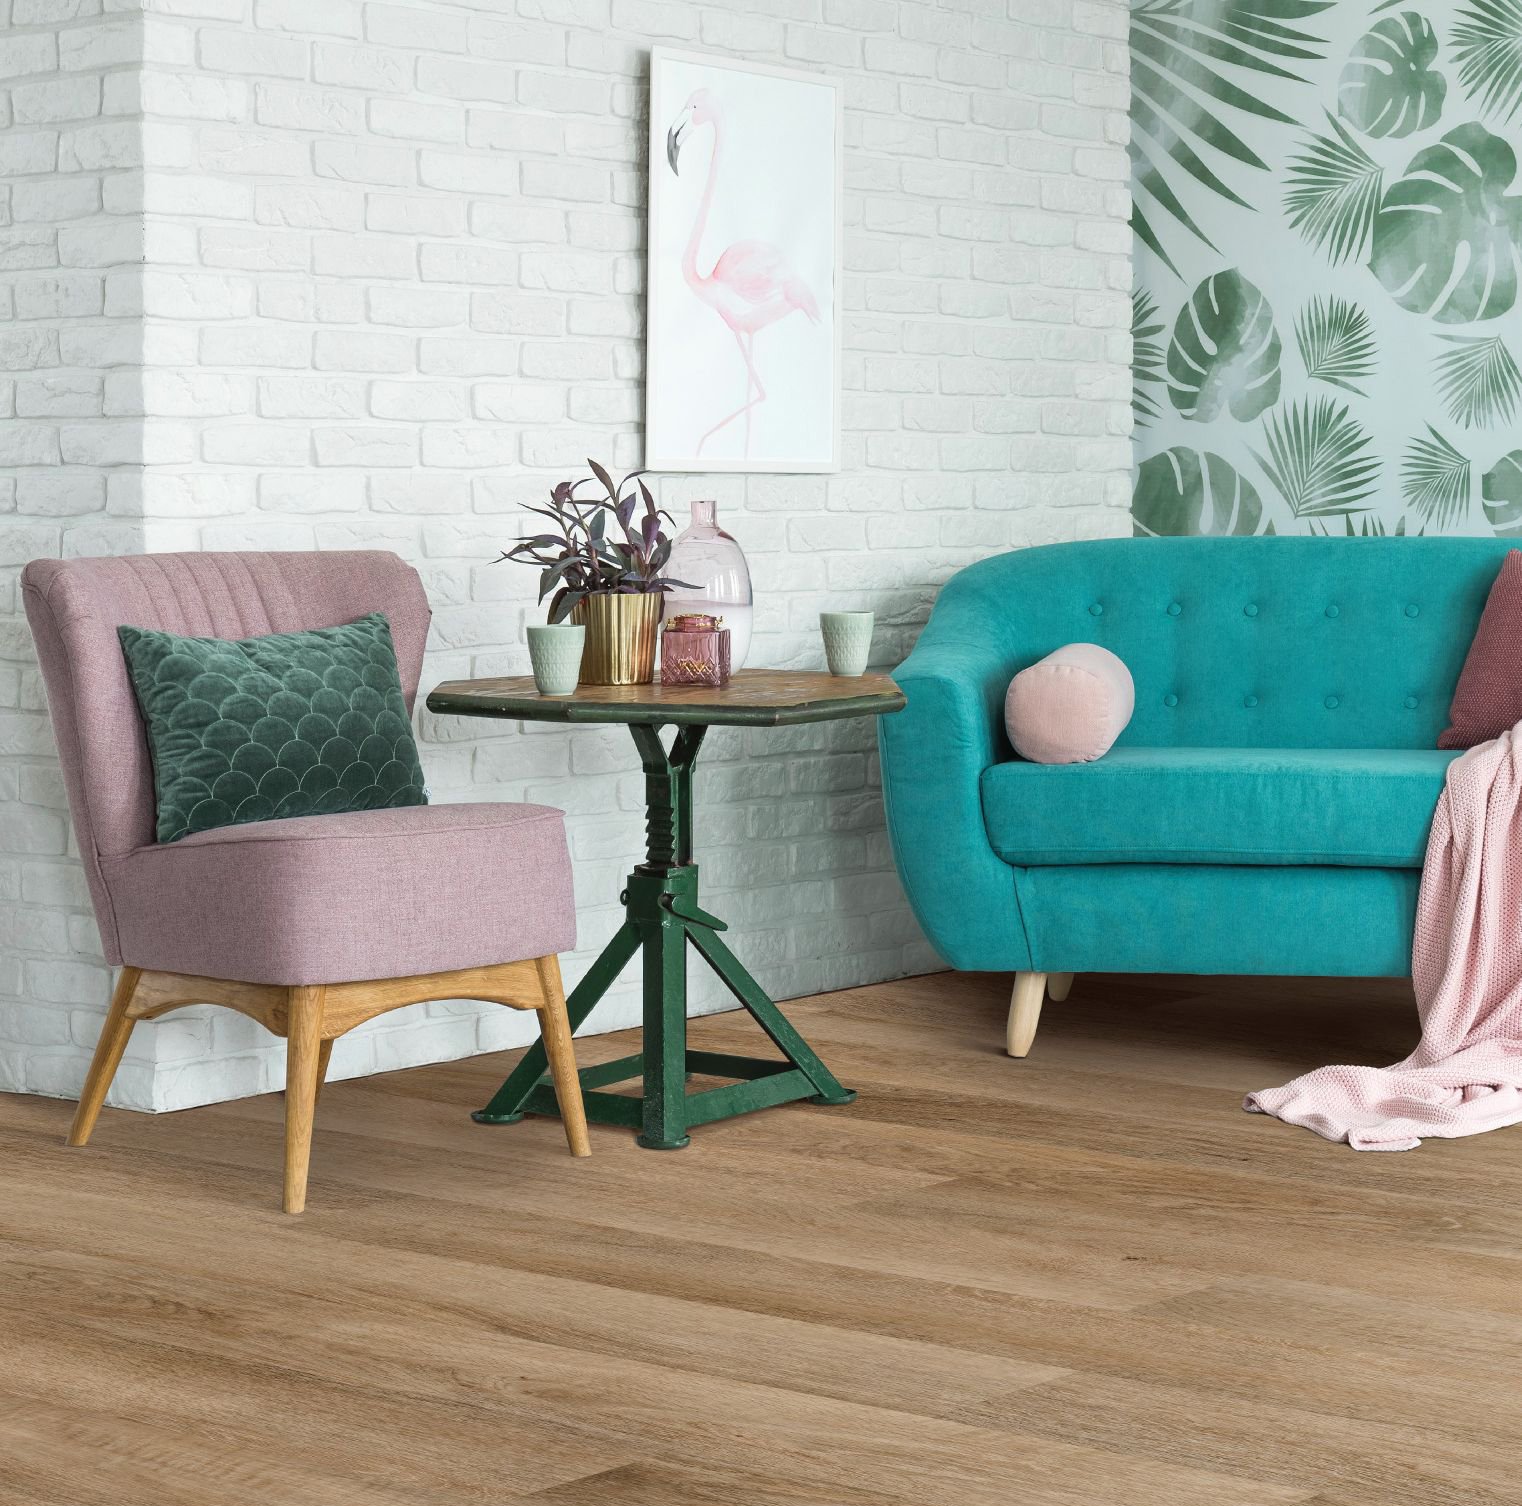 pink arm chair and teal couch on vinyl floor - Essex Paint and Carpet